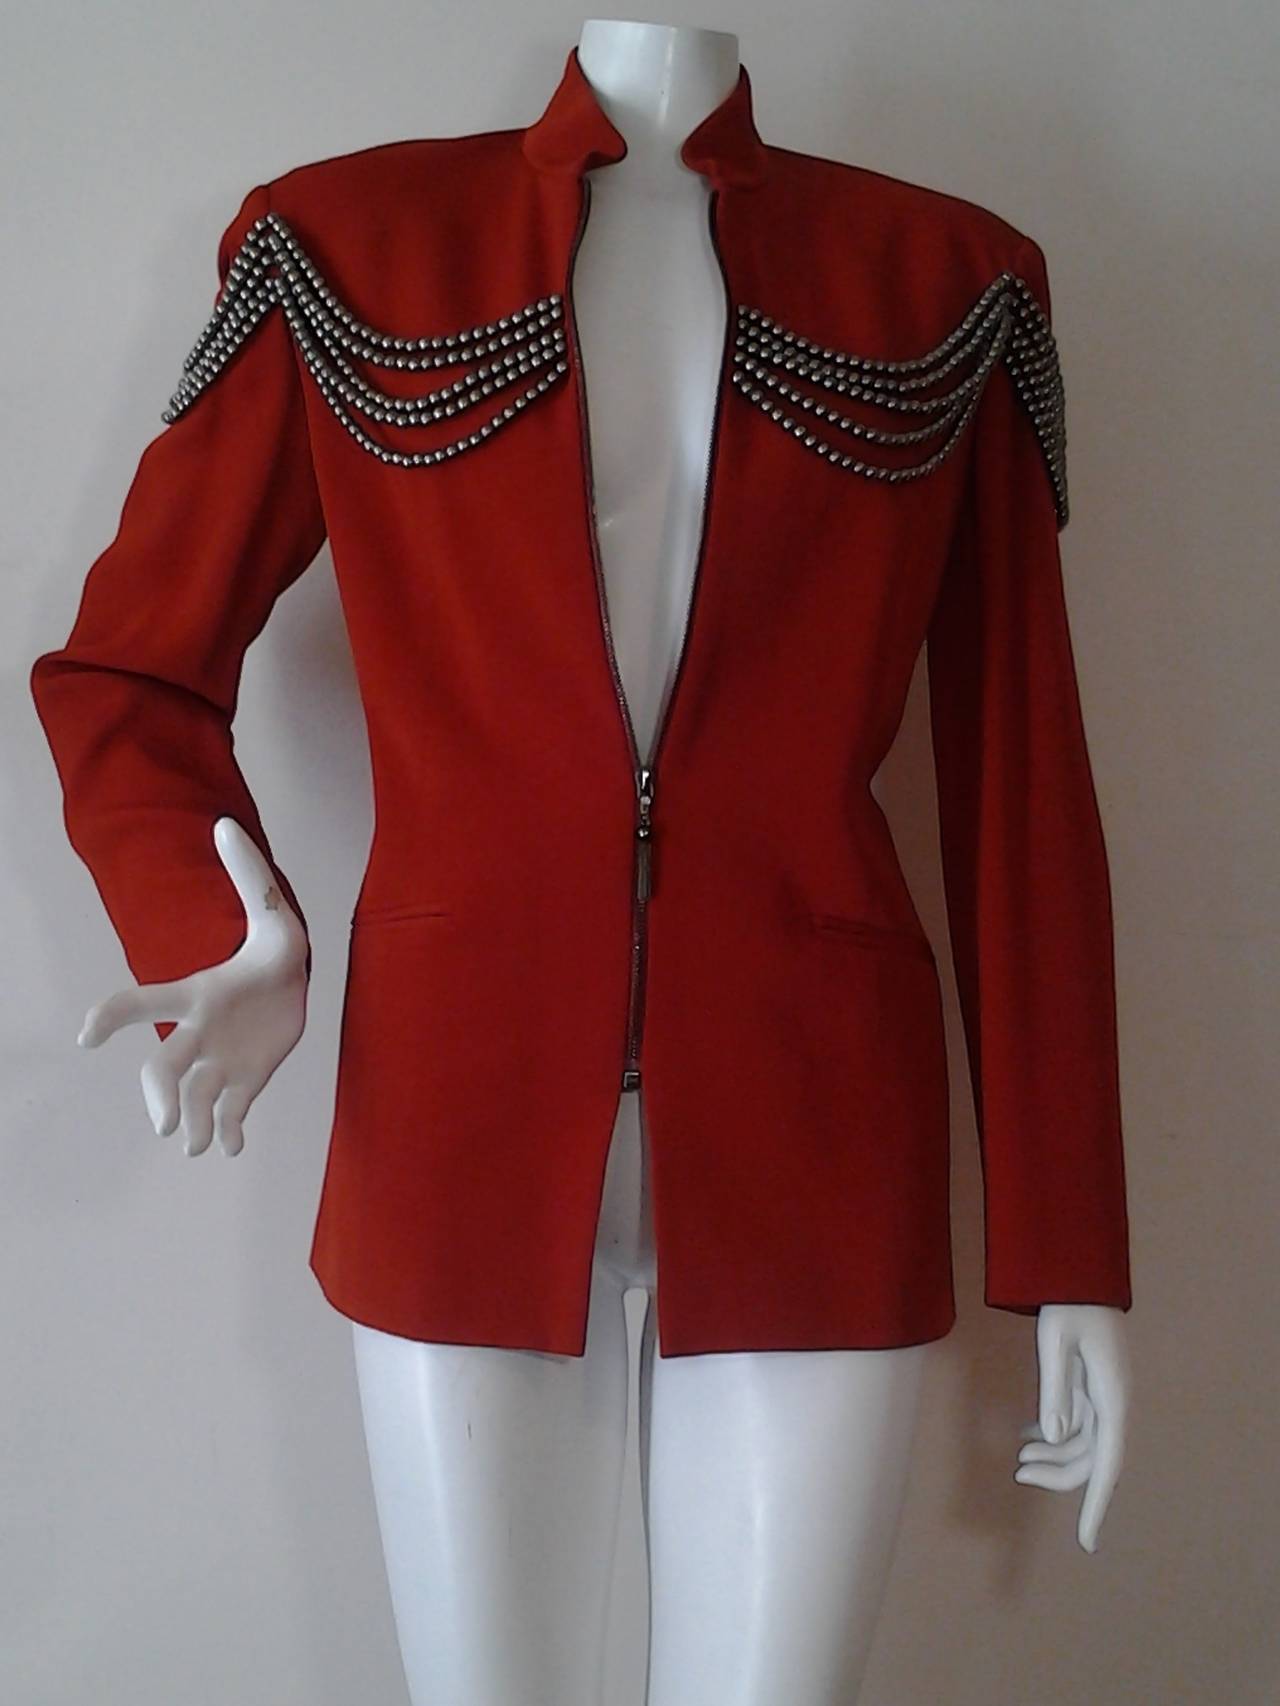 1990s Rifat Ozbek Nehru collar, front zip, military-inspired jacket in cinnabar rayon. Festooned at the shoulders with copper toned resin beading.